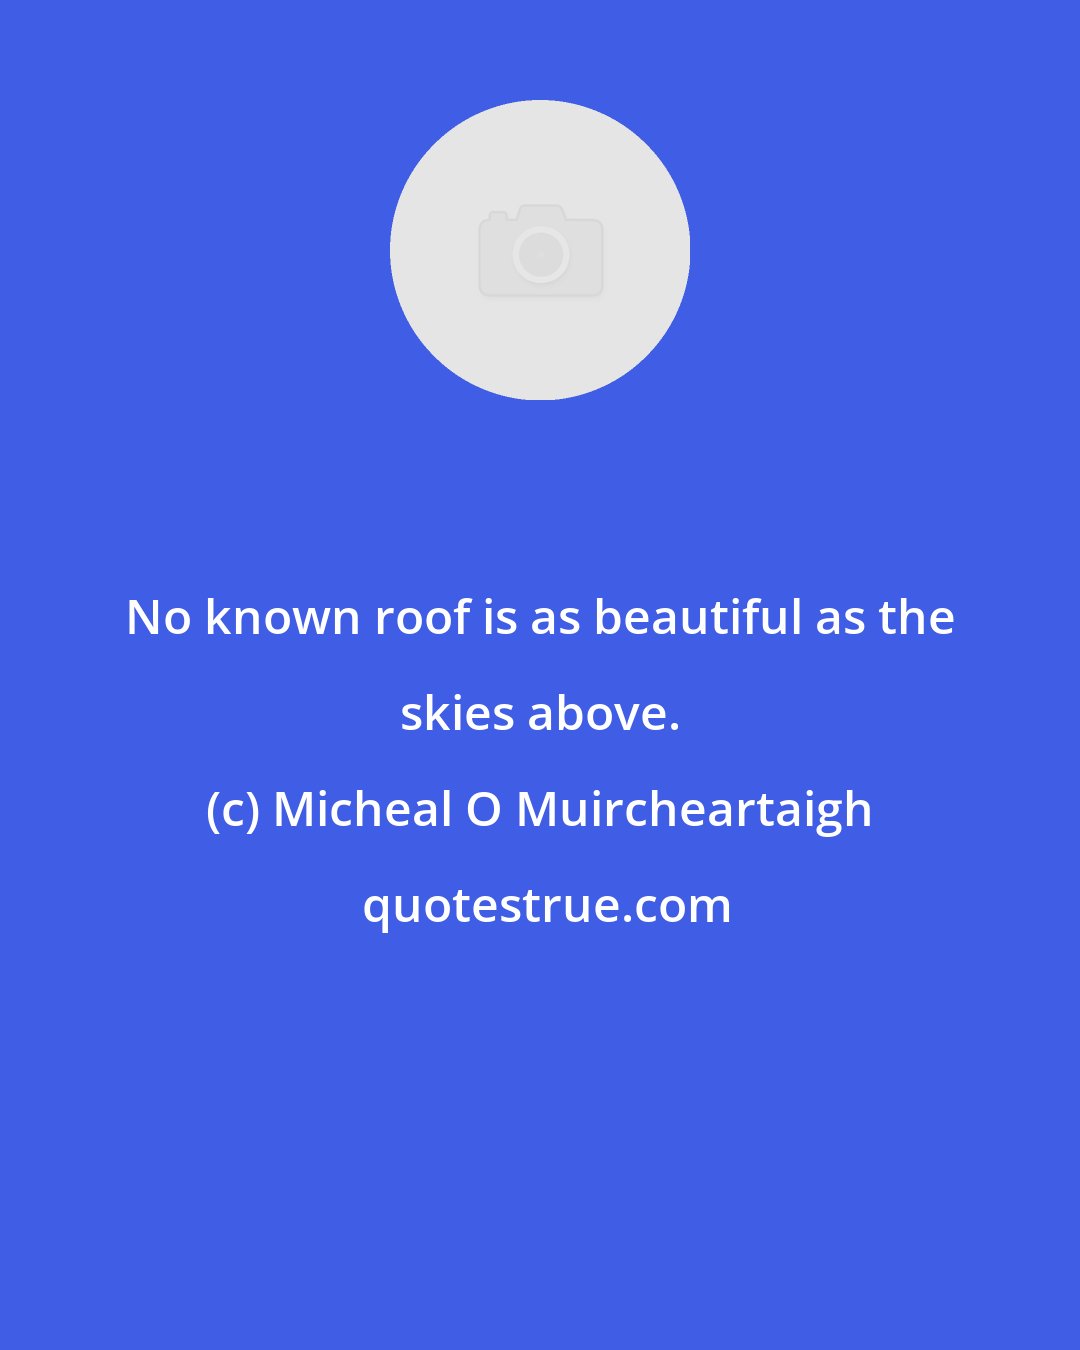 Micheal O Muircheartaigh: No known roof is as beautiful as the skies above.